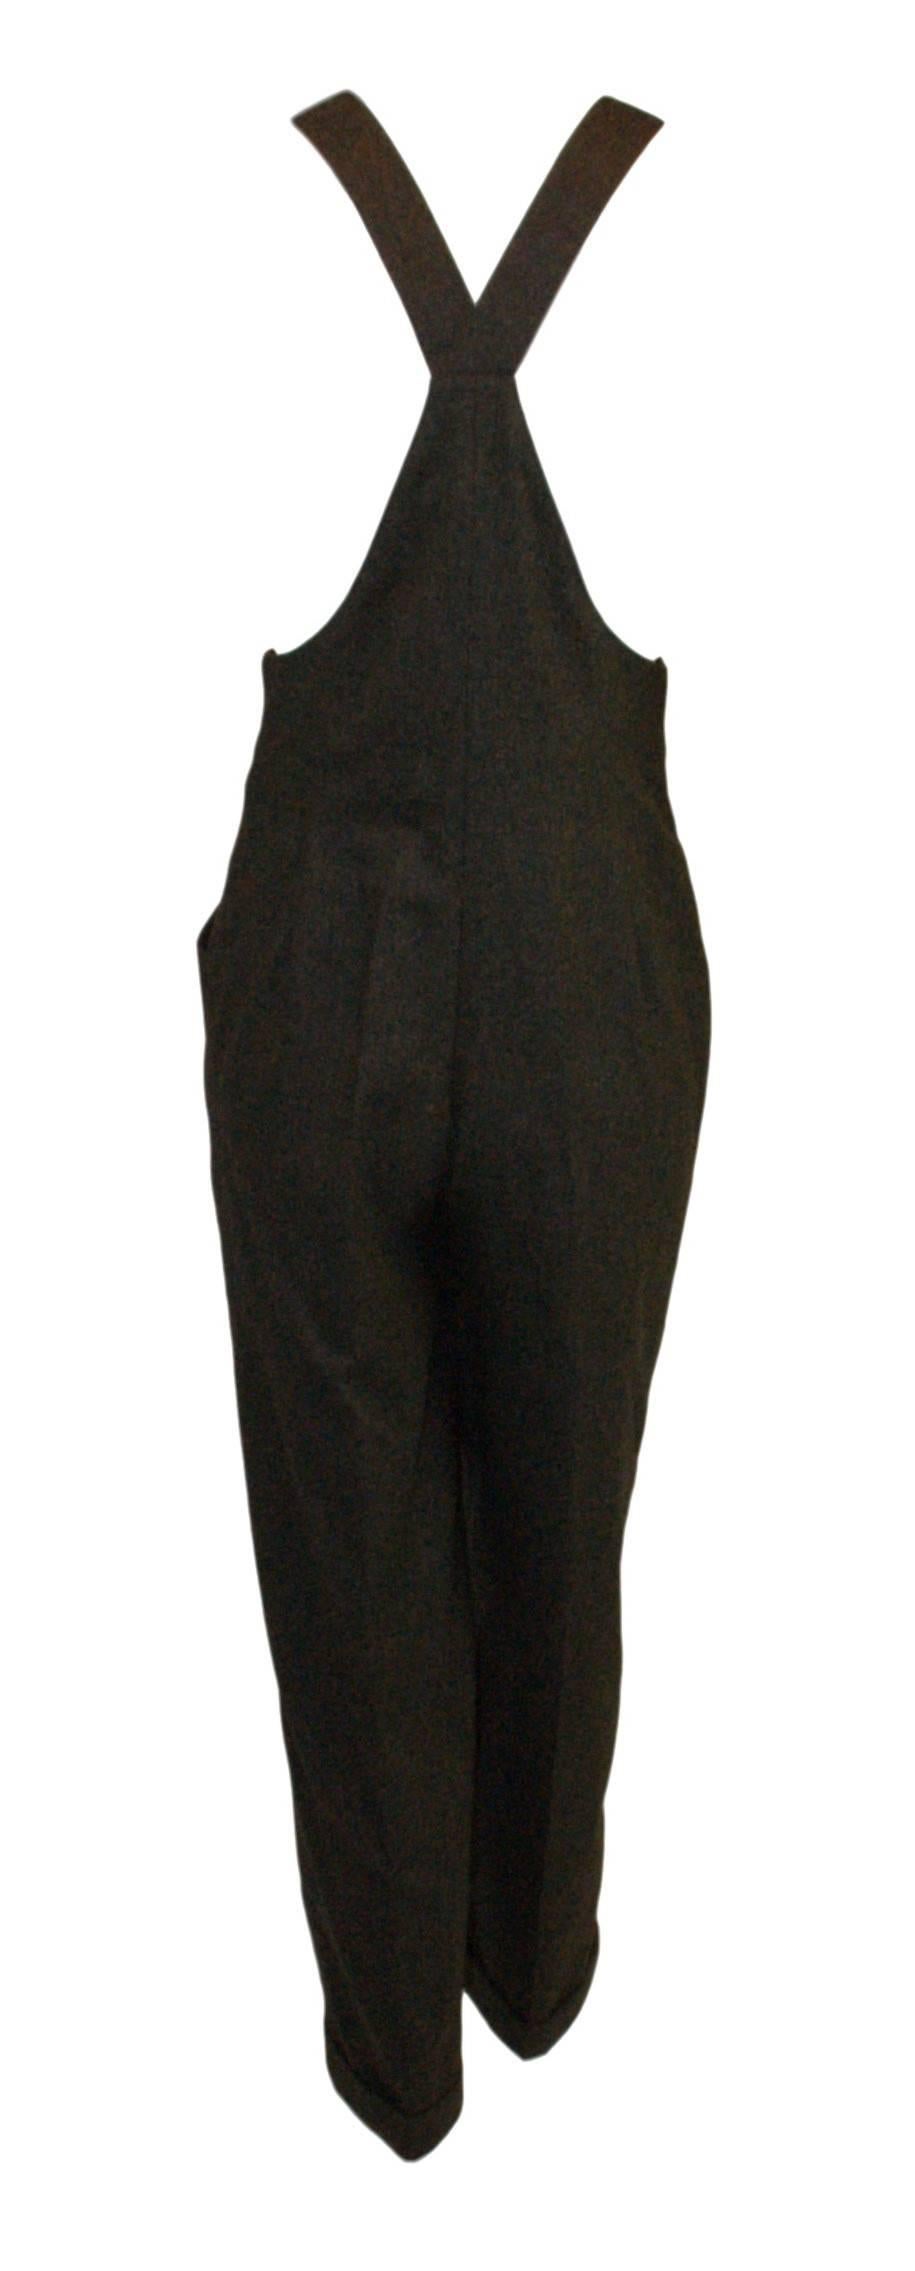 Black S/S 1994 Gianni Versace Gray Wool & Cashmere Overalls Jumpsuit 